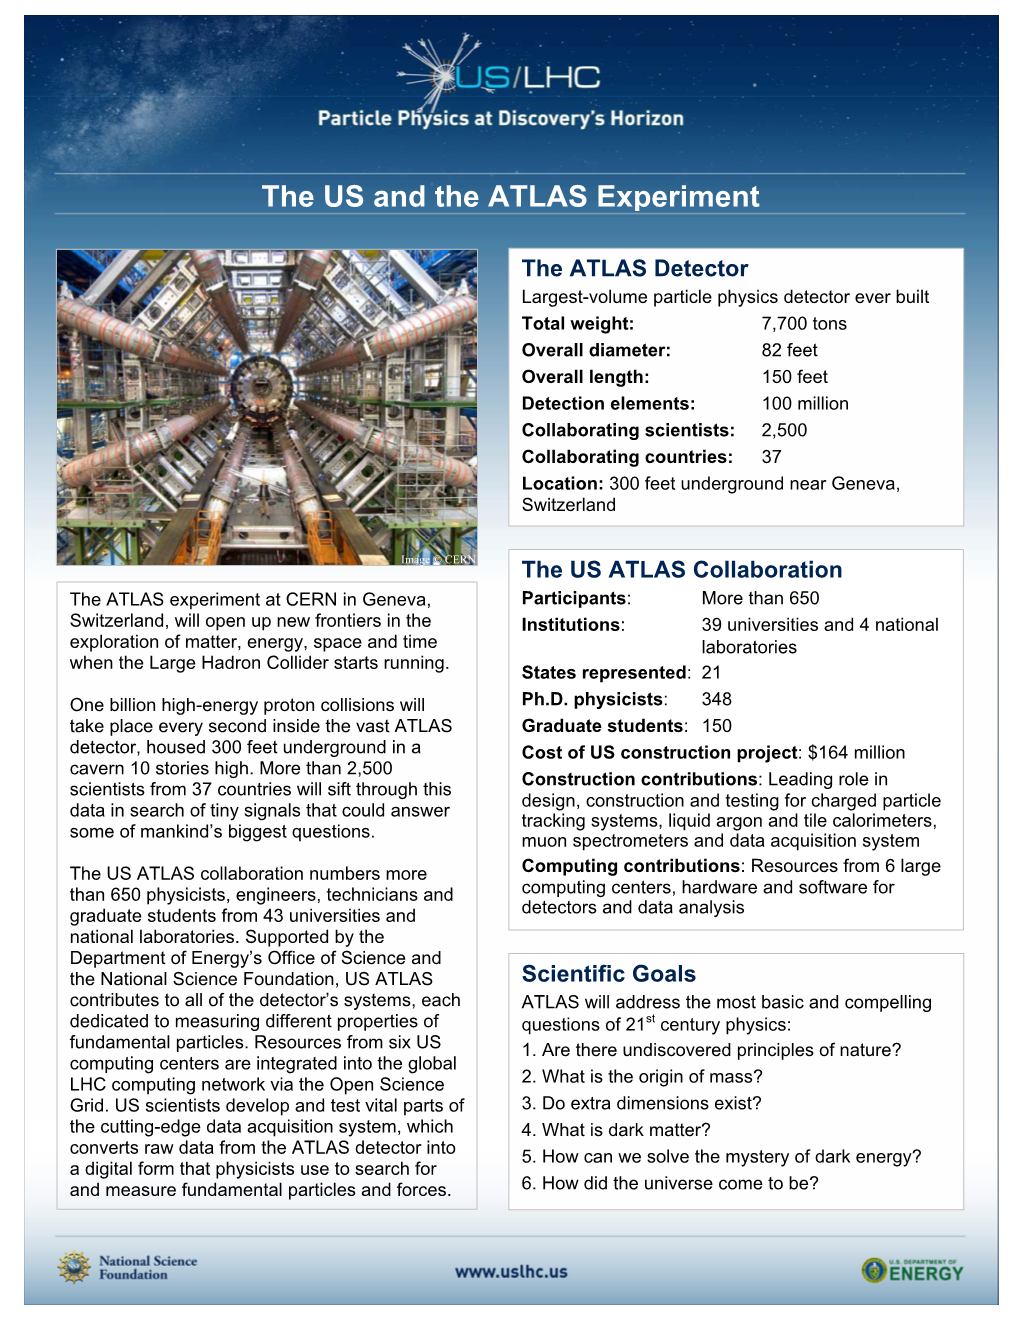 The US and the ATLAS Experiment